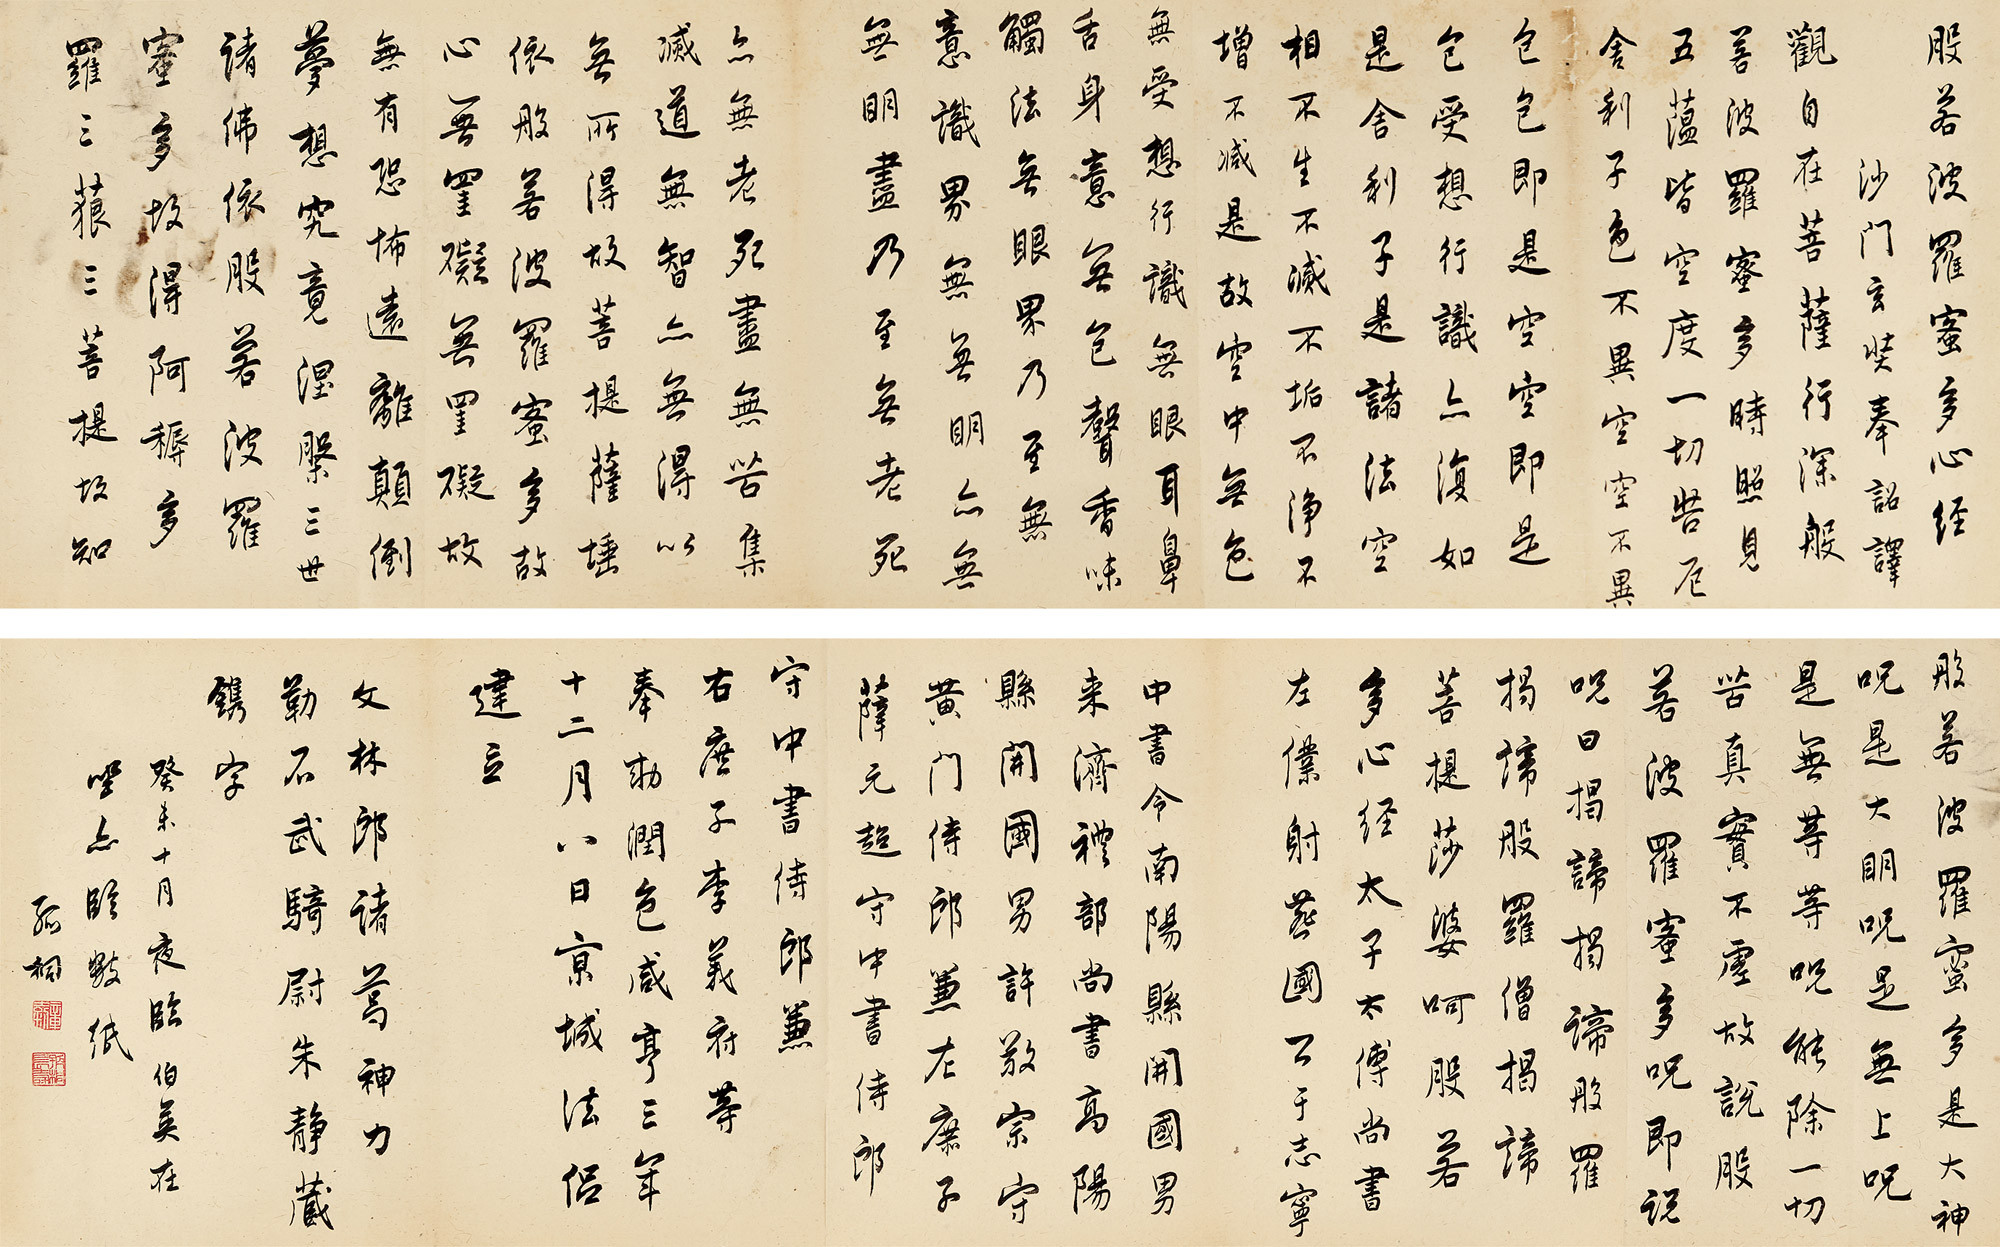 Calligraphy in style of Xinjing in Running Script